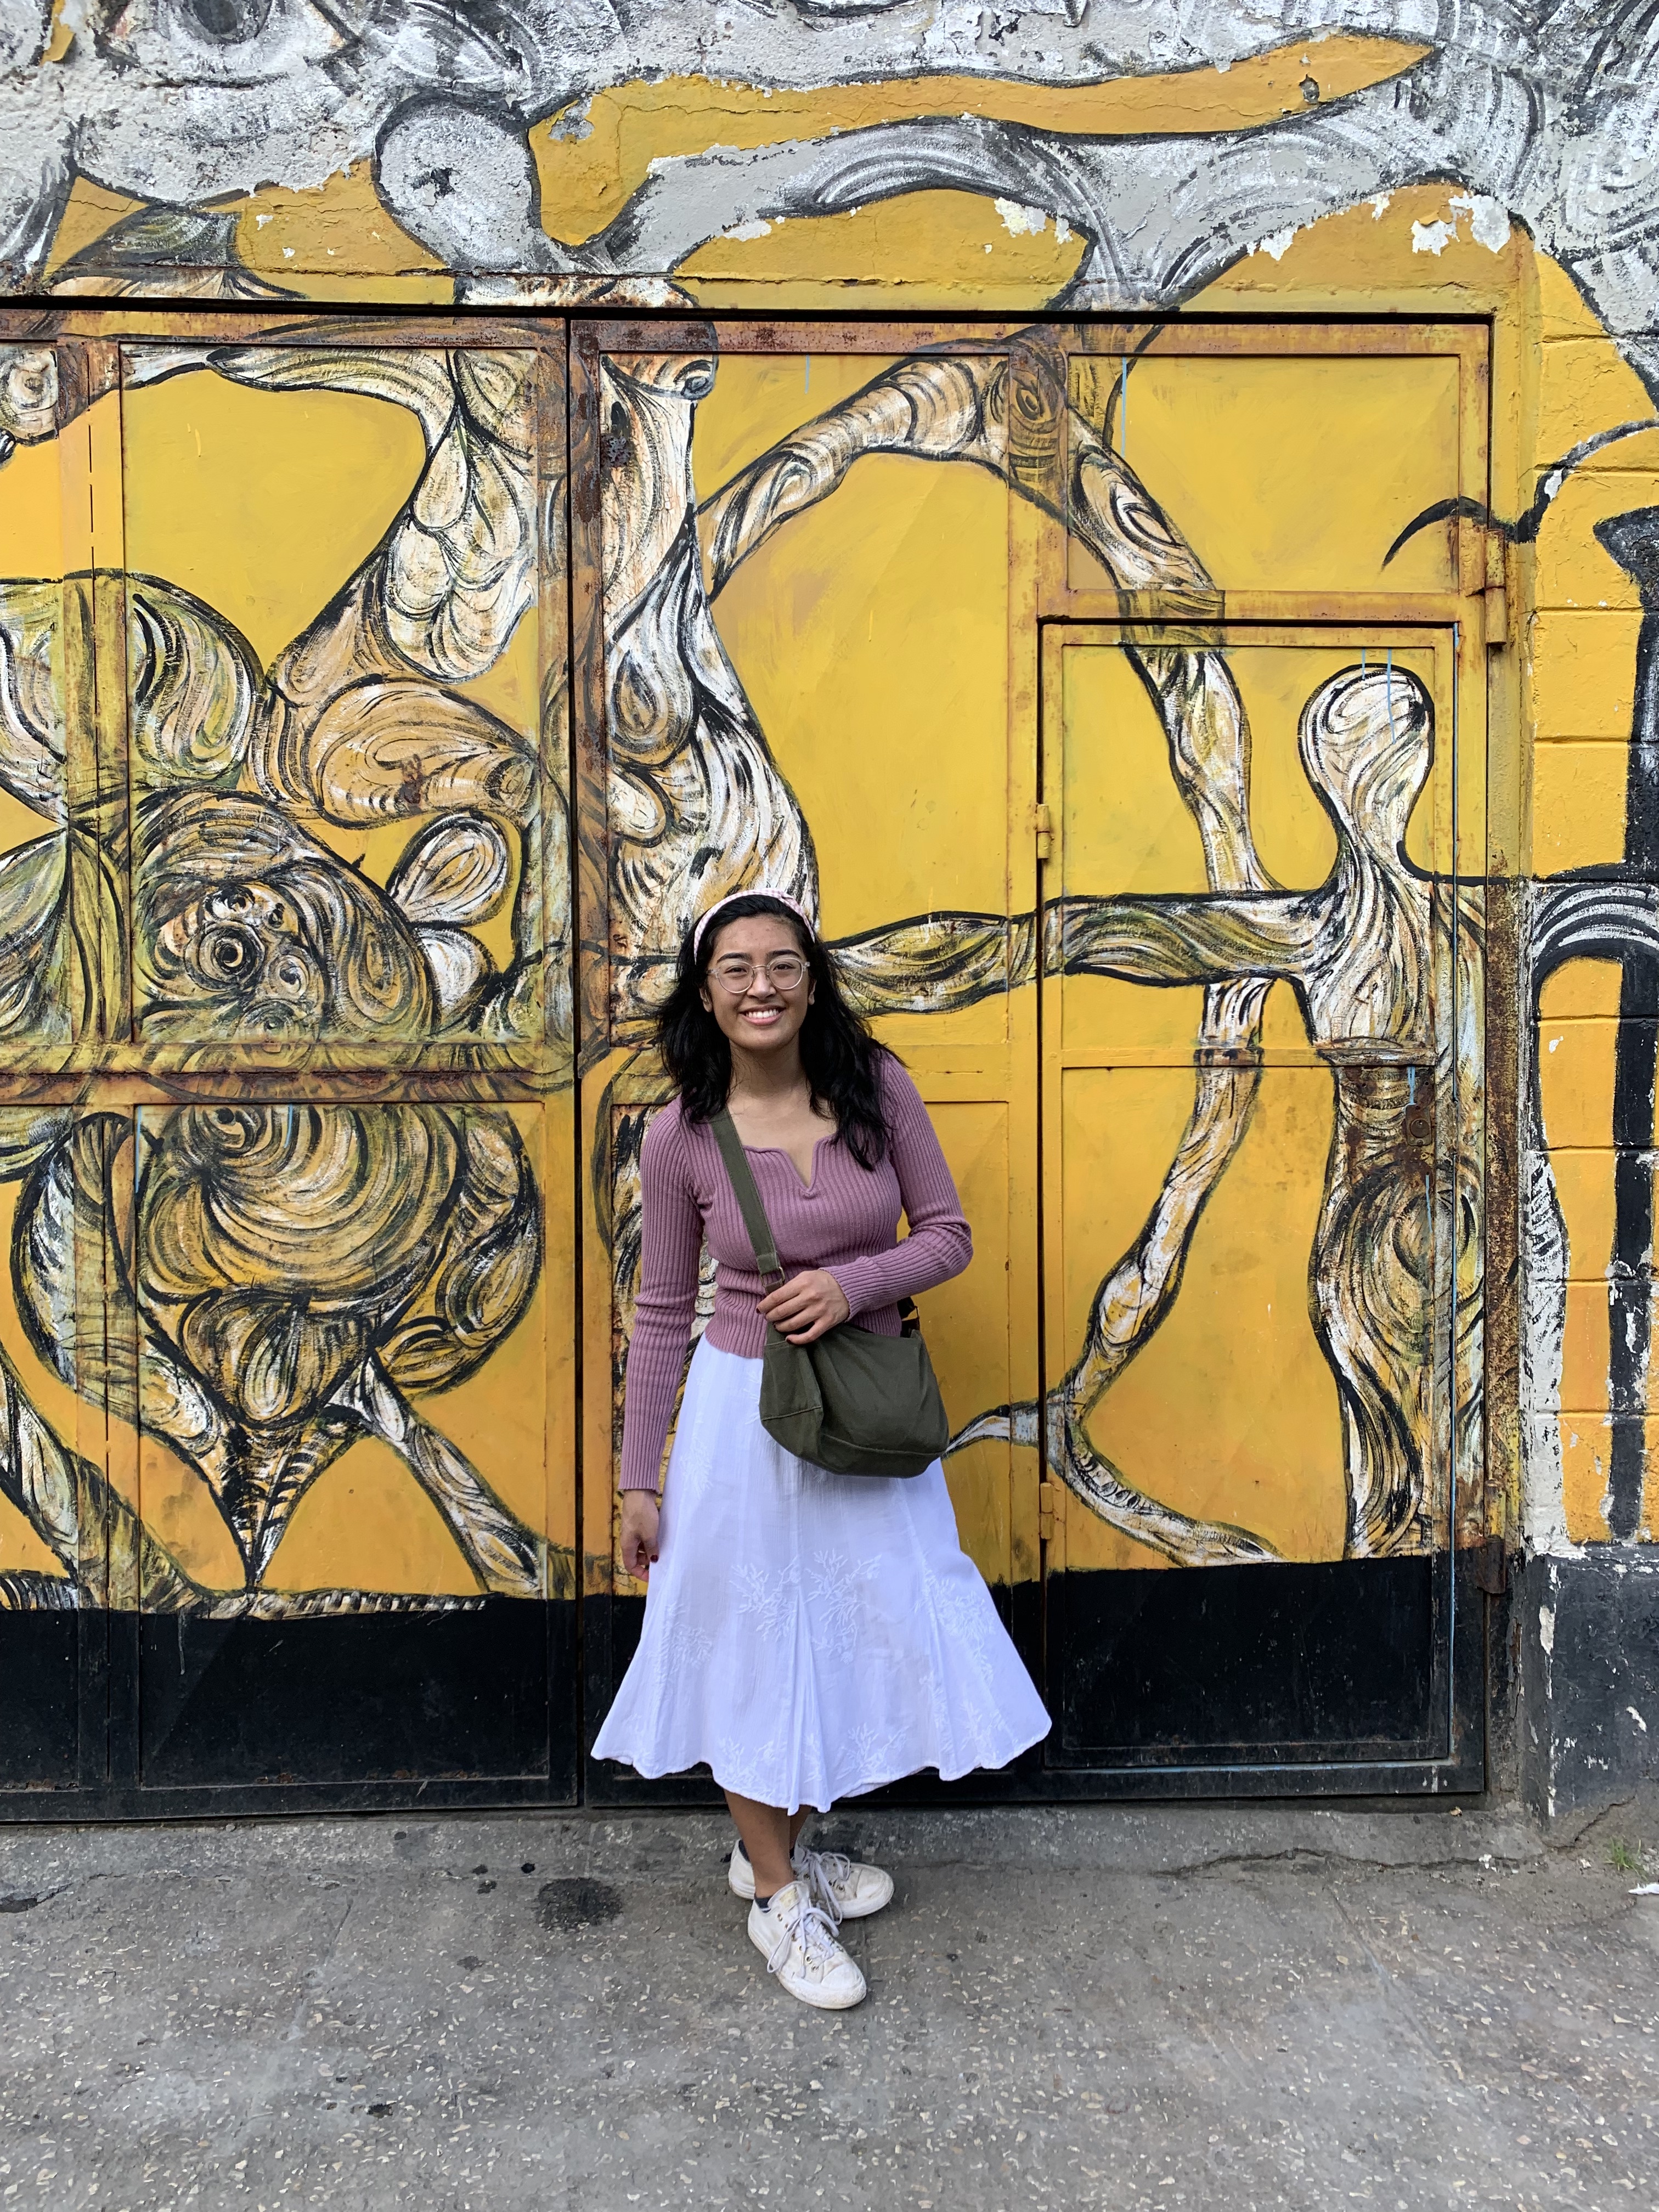 Regina, wearing a pink top and long white skirt, posing in front of a yellow and white mural depicting human figures in Havana, Cuba. 